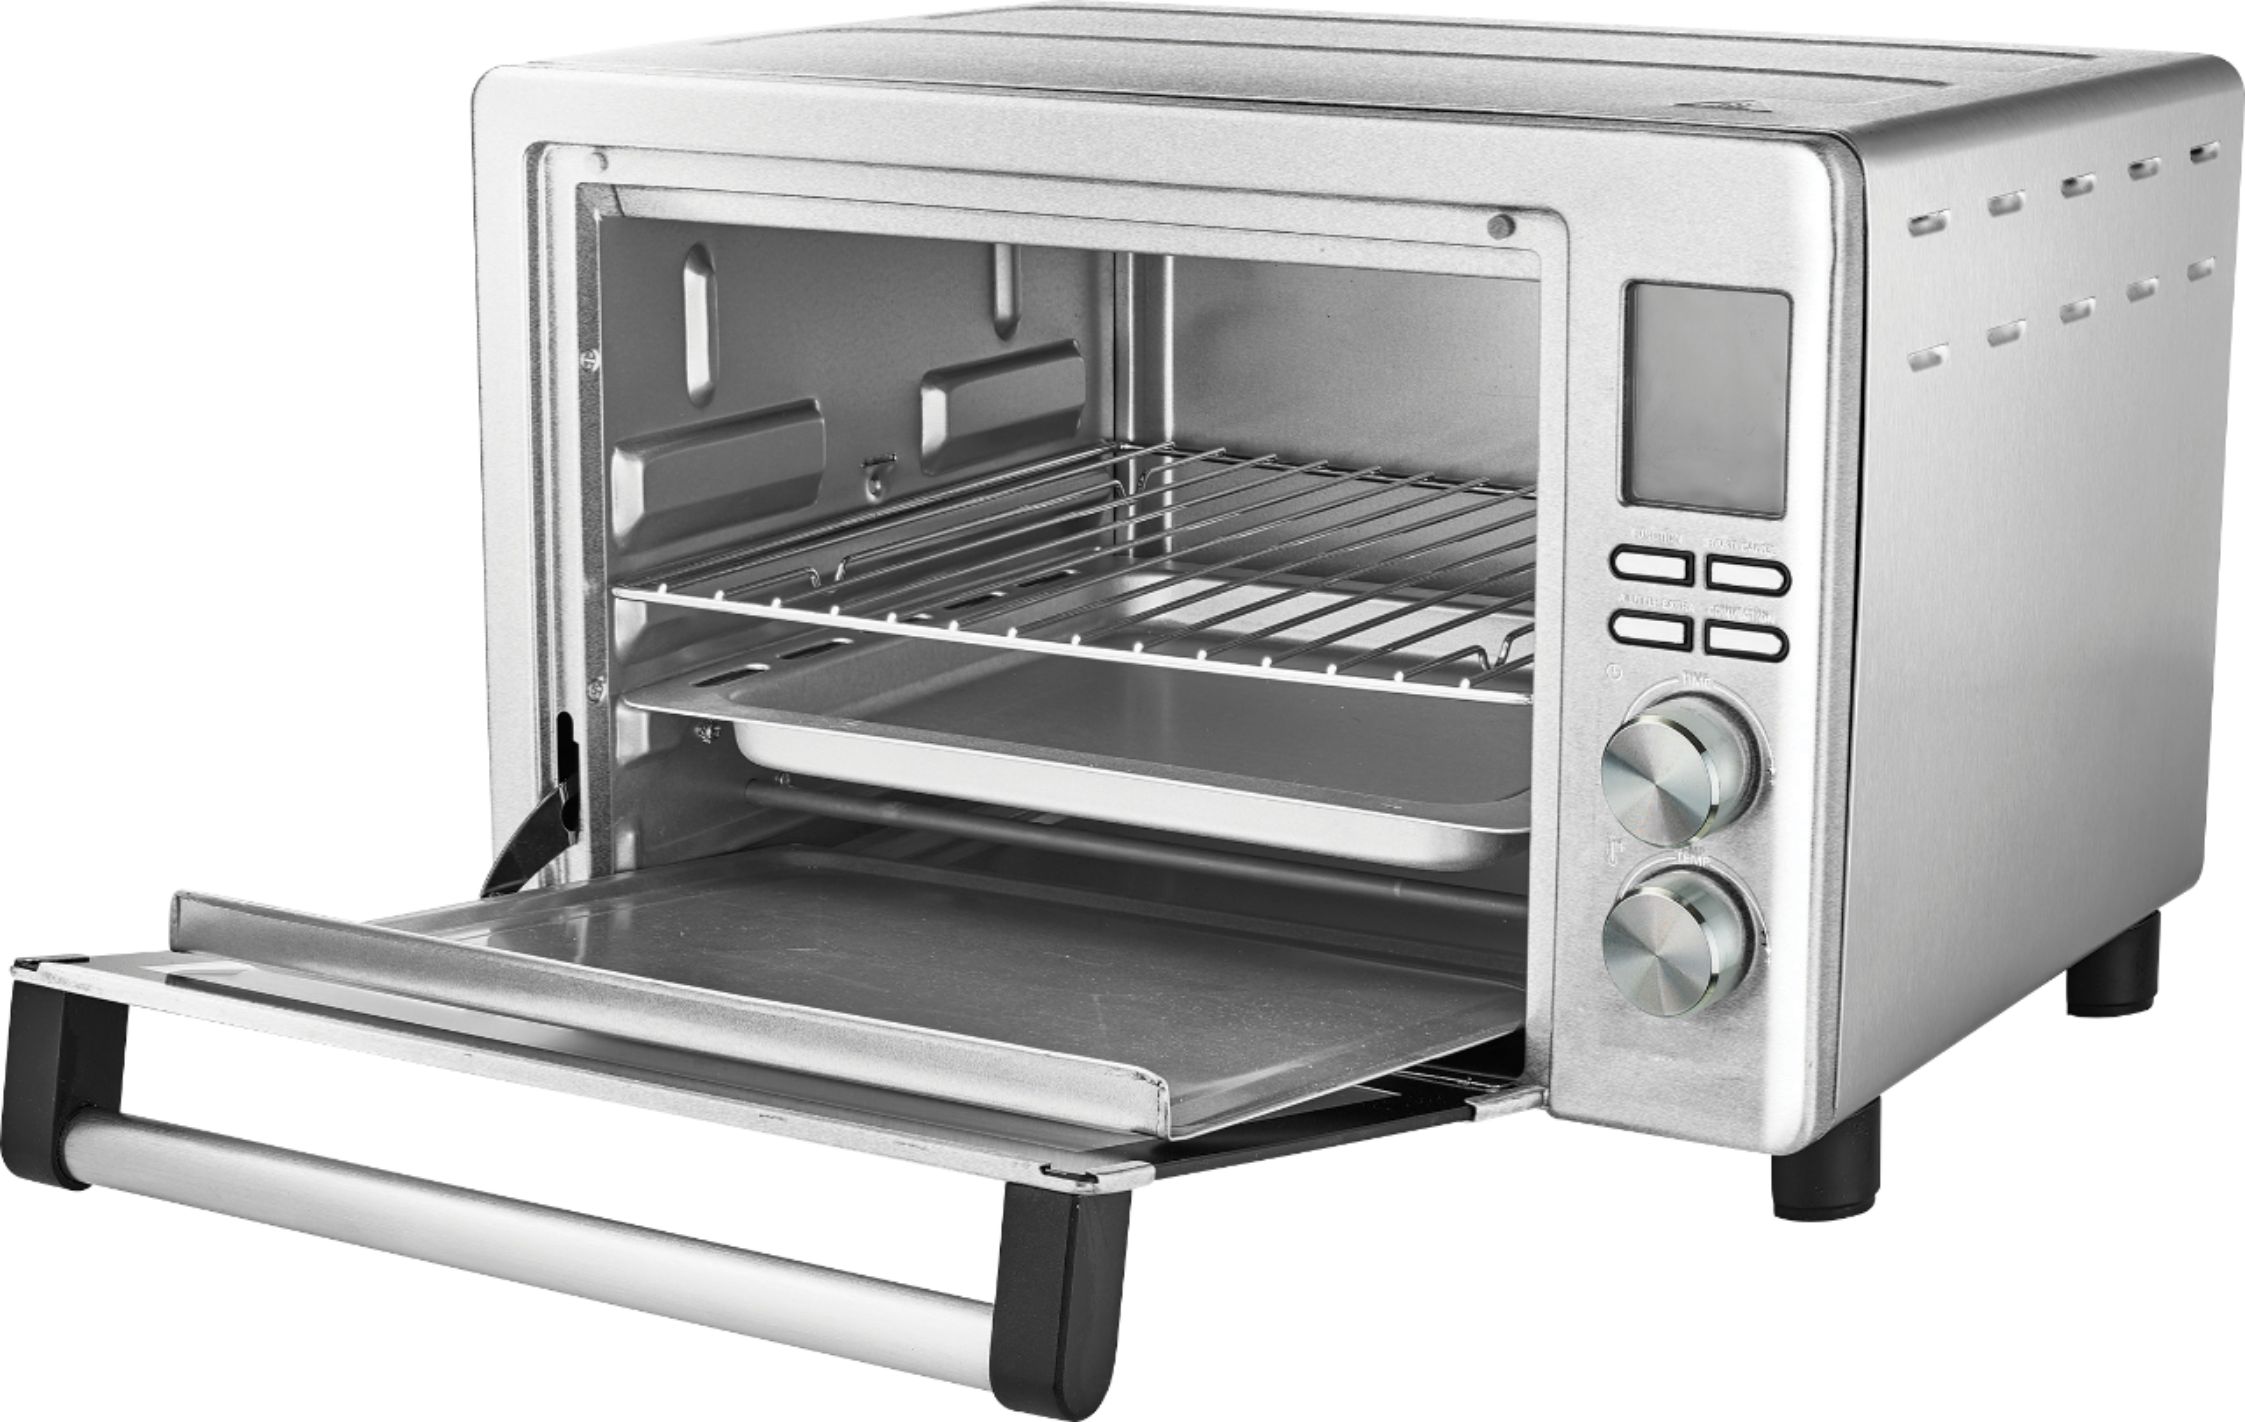 Rent to Own Bella Bella Pro Series - 12-in-1 6-Slice Toaster Oven + 33-qt. Air  Fryer with French Doors - Stainless Steel at Aaron's today!